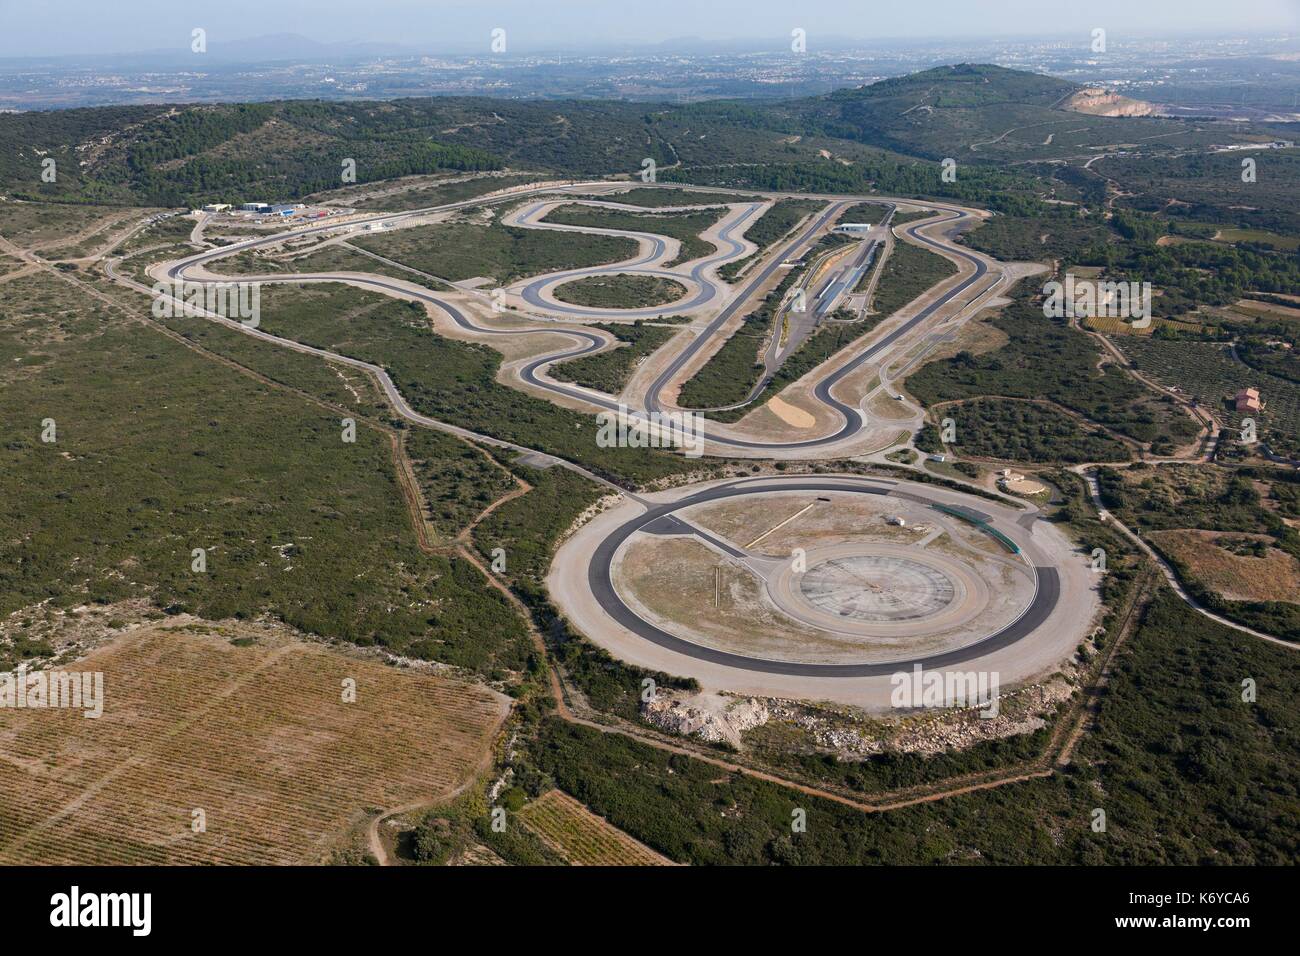 France, Herault, Mireval, carlan circuit or Karland, pneumatic test center of Goodyear (aerial view) Stock Photo